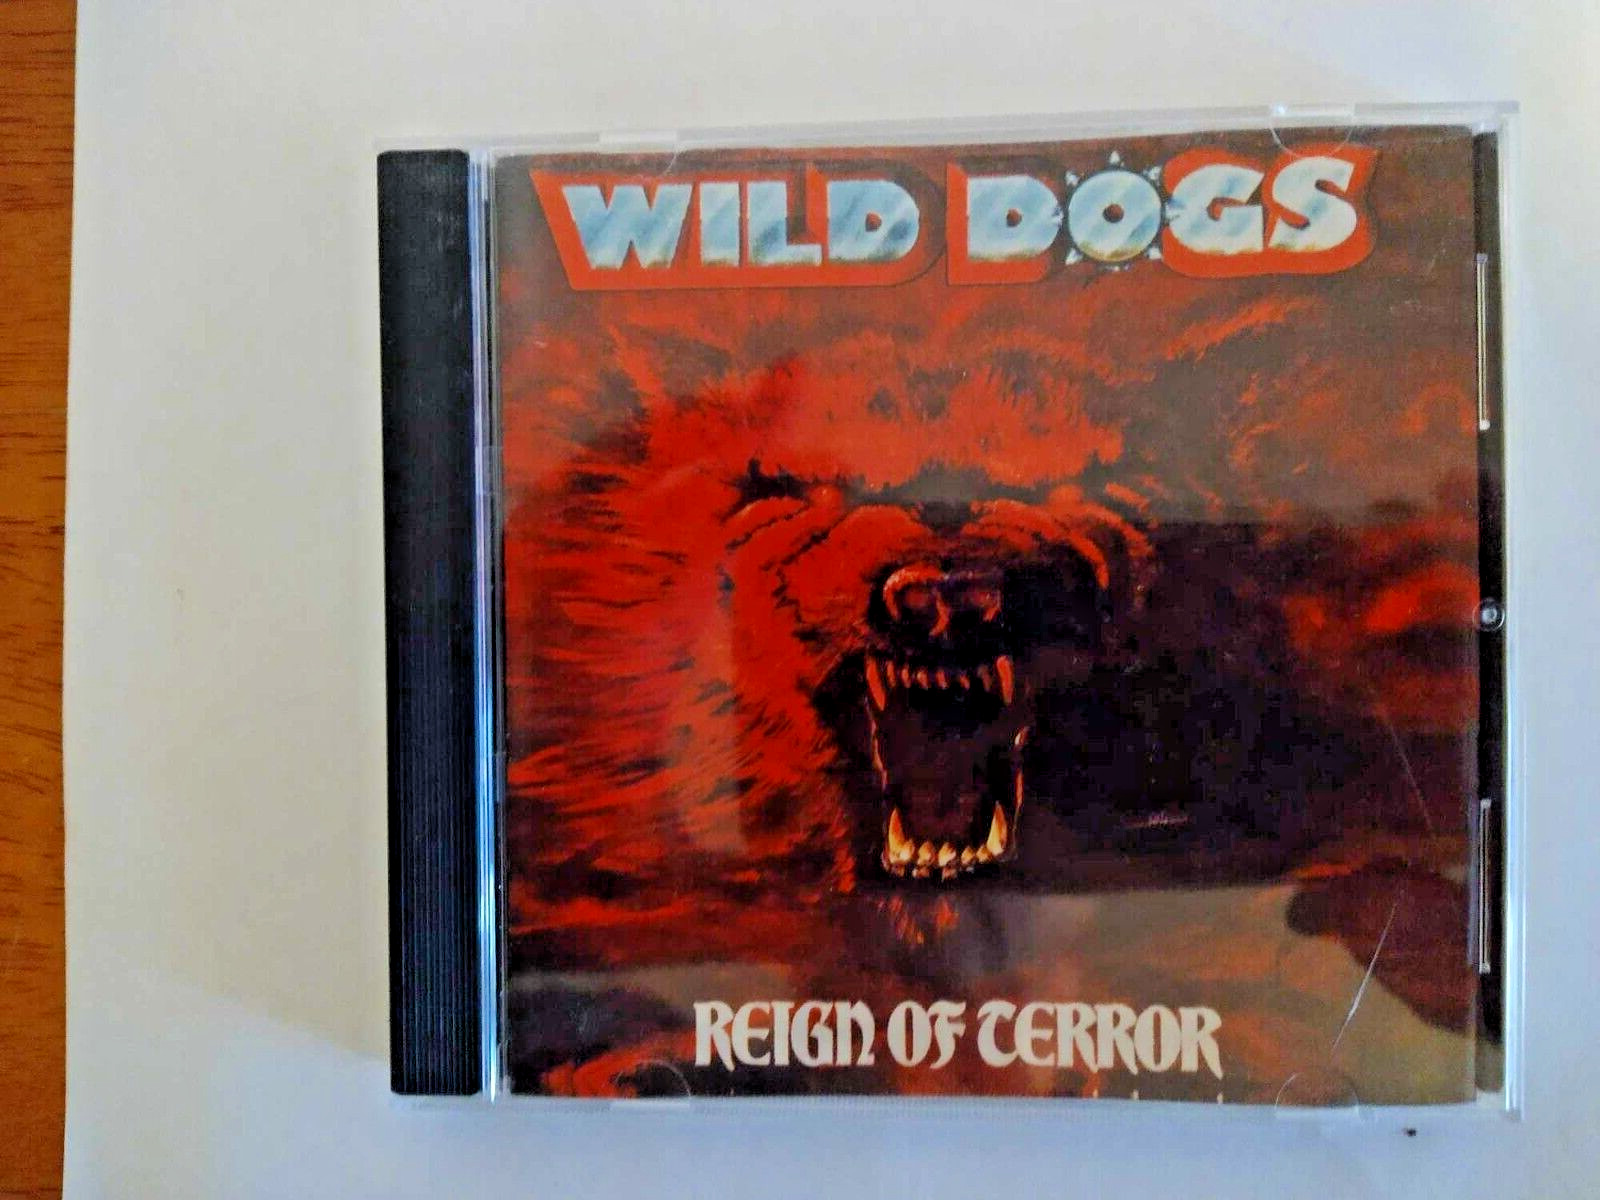 Wild Dogs CD Reign of Terror     Gently Used Hard Rock and Metal